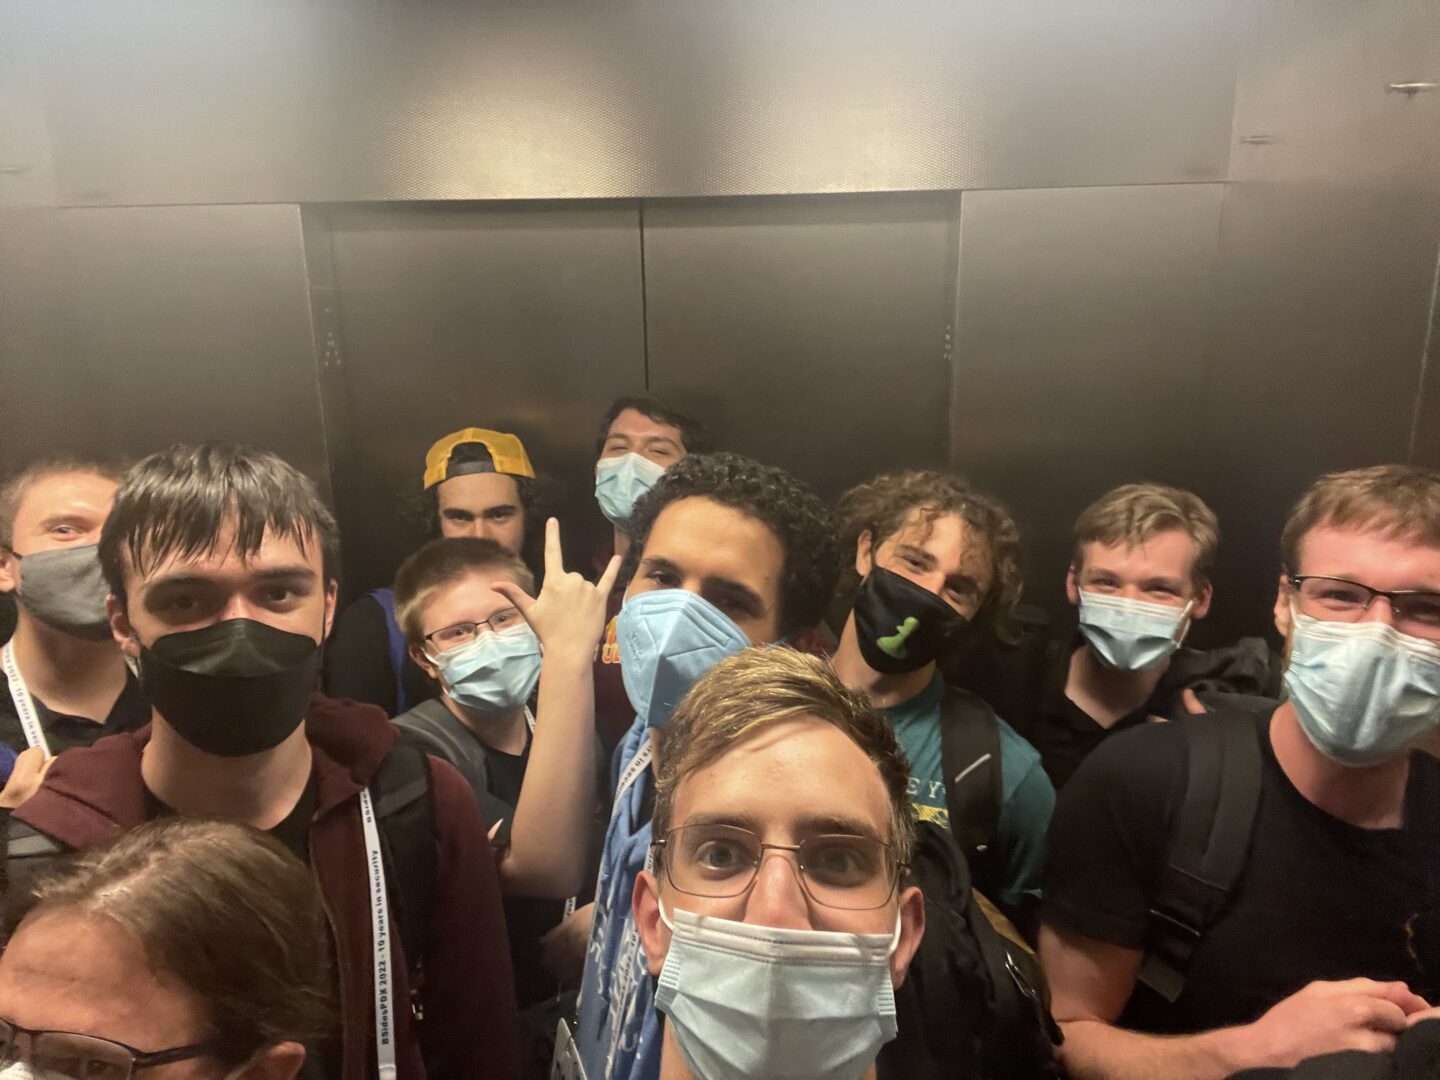 The OSUSEC team at BSides, crammed into an elevator, ready to head home.